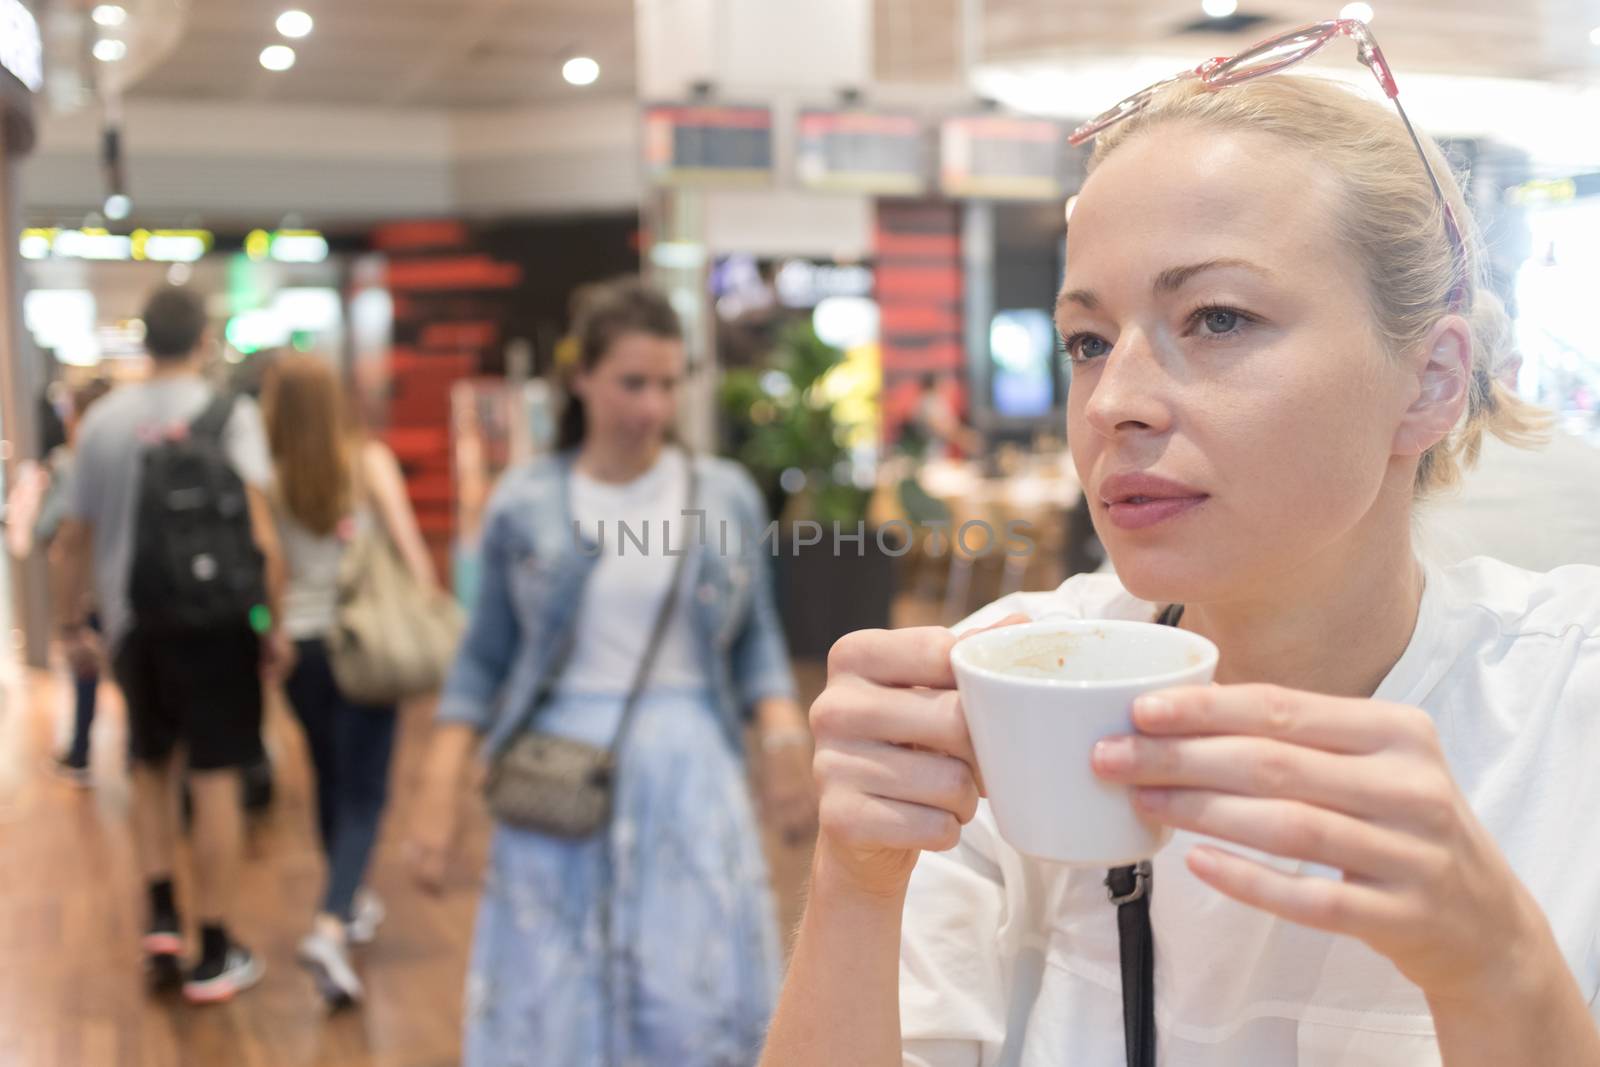 Portrait of a casual young blond woman having a cup of coffee, sitting and waiting in cafe indoors of an airport, station, food court or shopping mall.